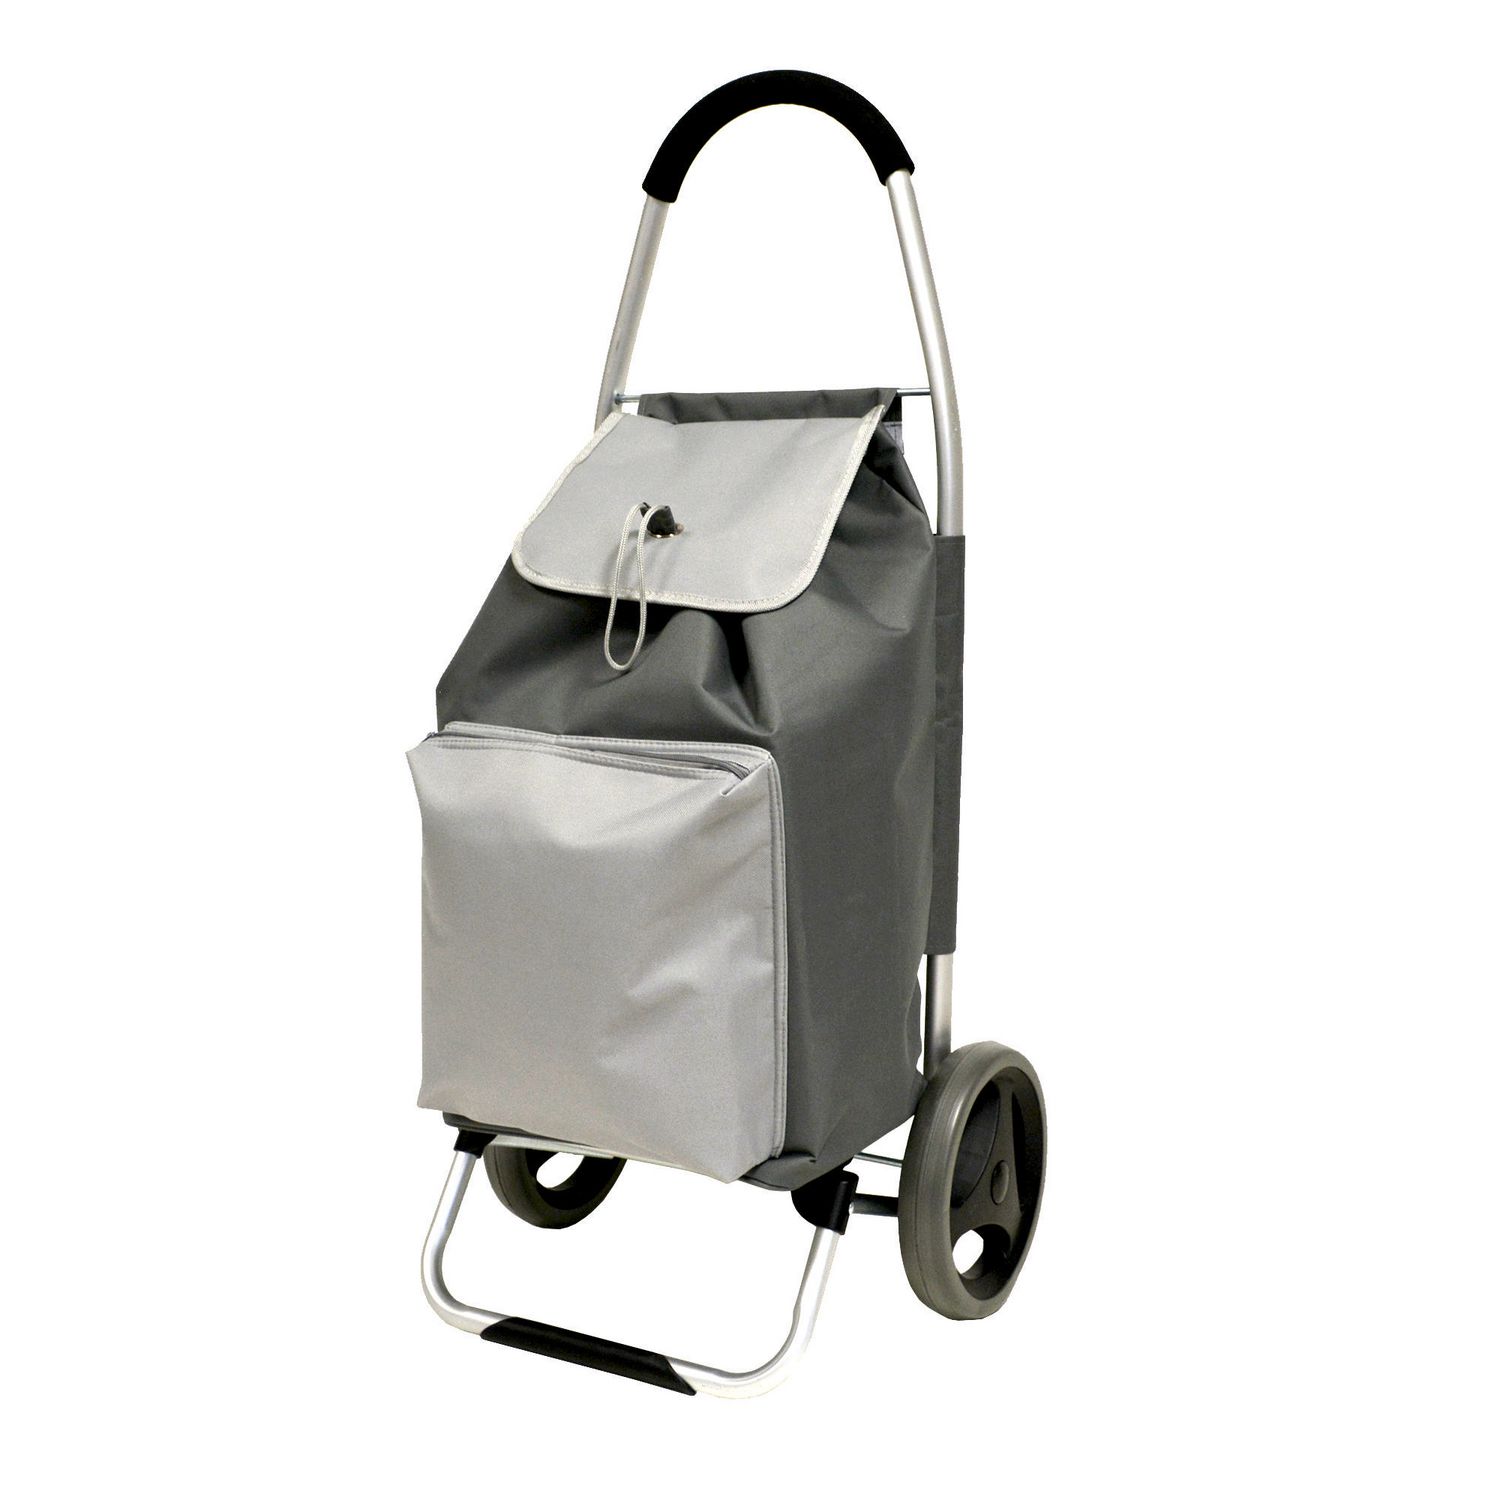 New Extra Tough Steel Quality Grocery Shopping Carts 36h X 30l